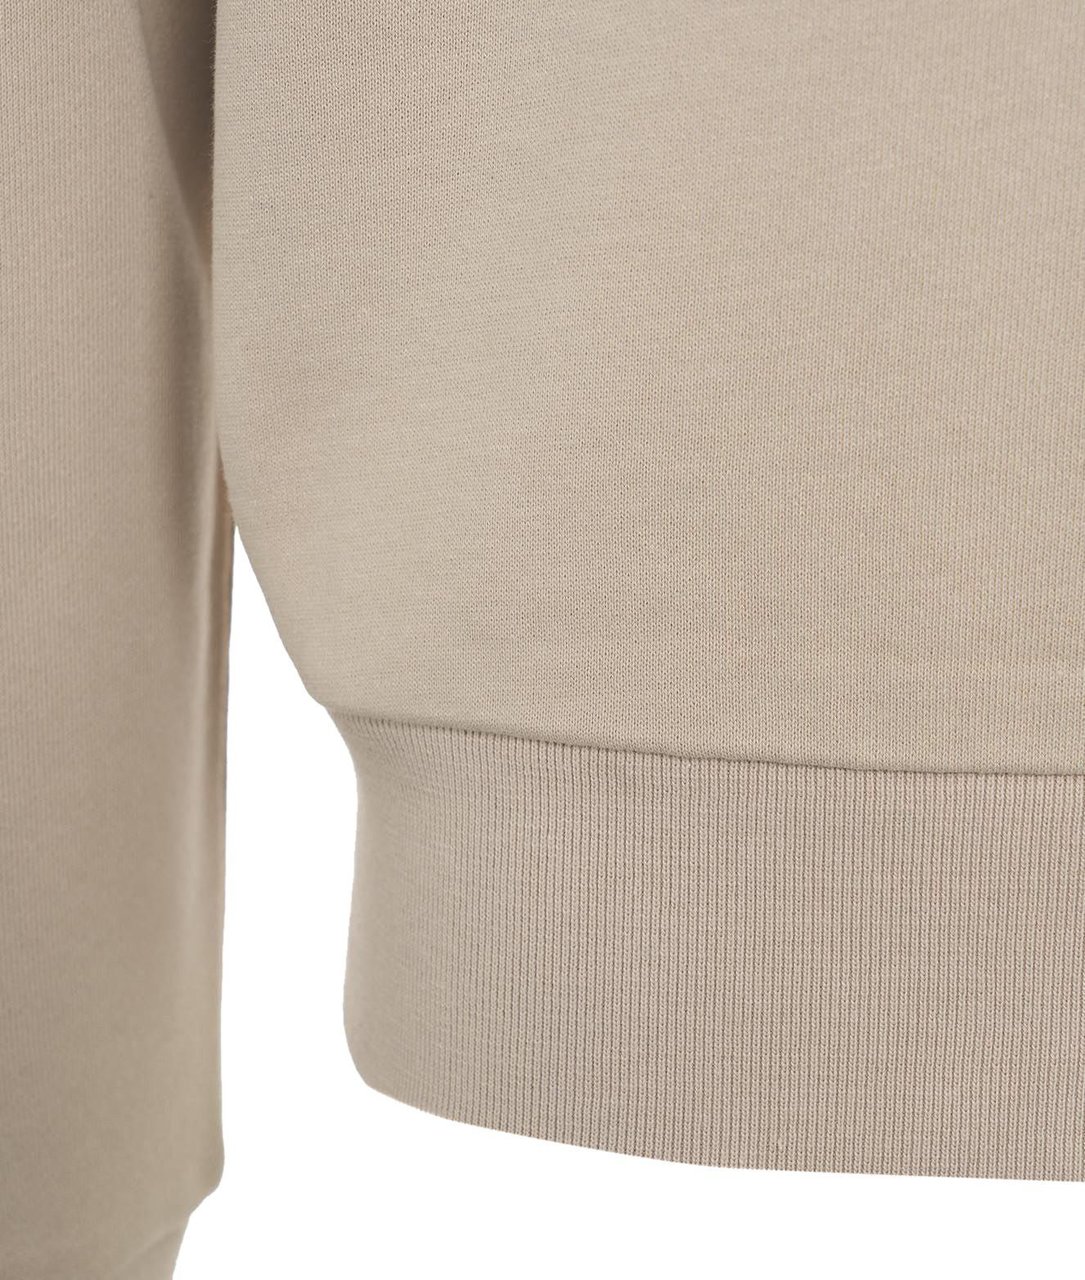 Herno Sweater with embroidered logo Beige